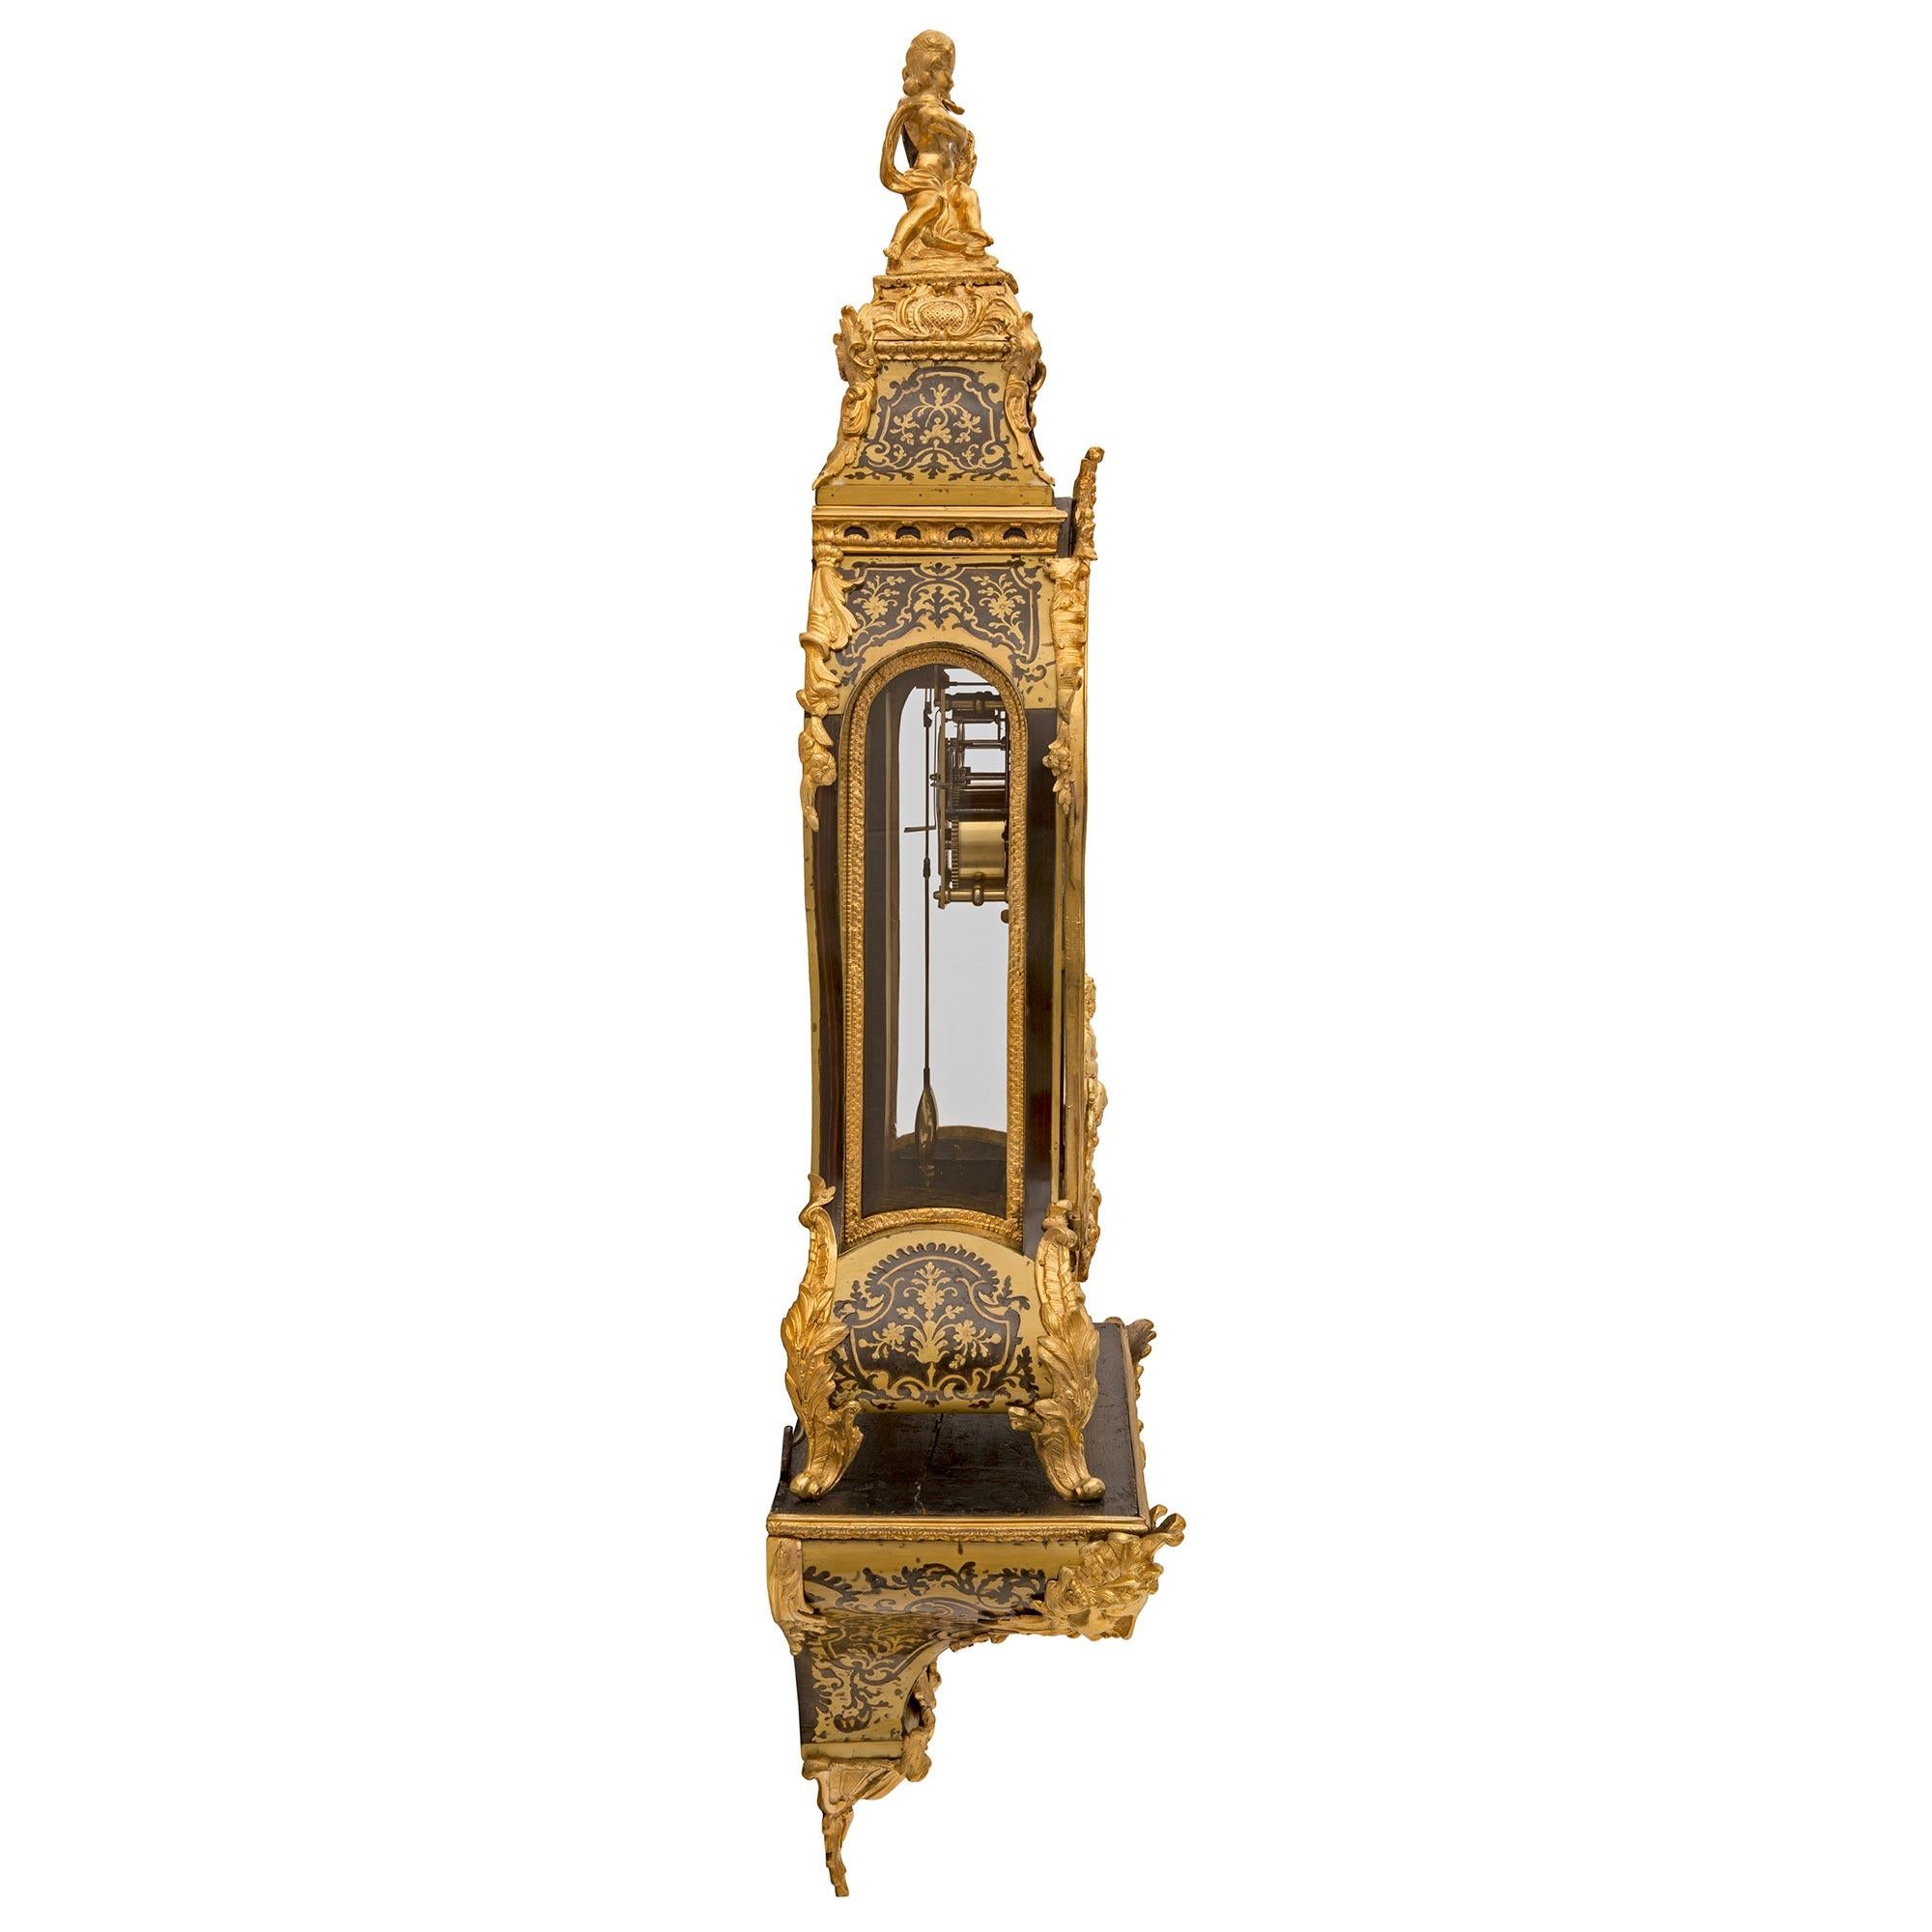 French 18th Century Louis XV Period Tortoiseshell and Ormolu Boulle Cartel Clock In Good Condition For Sale In West Palm Beach, FL